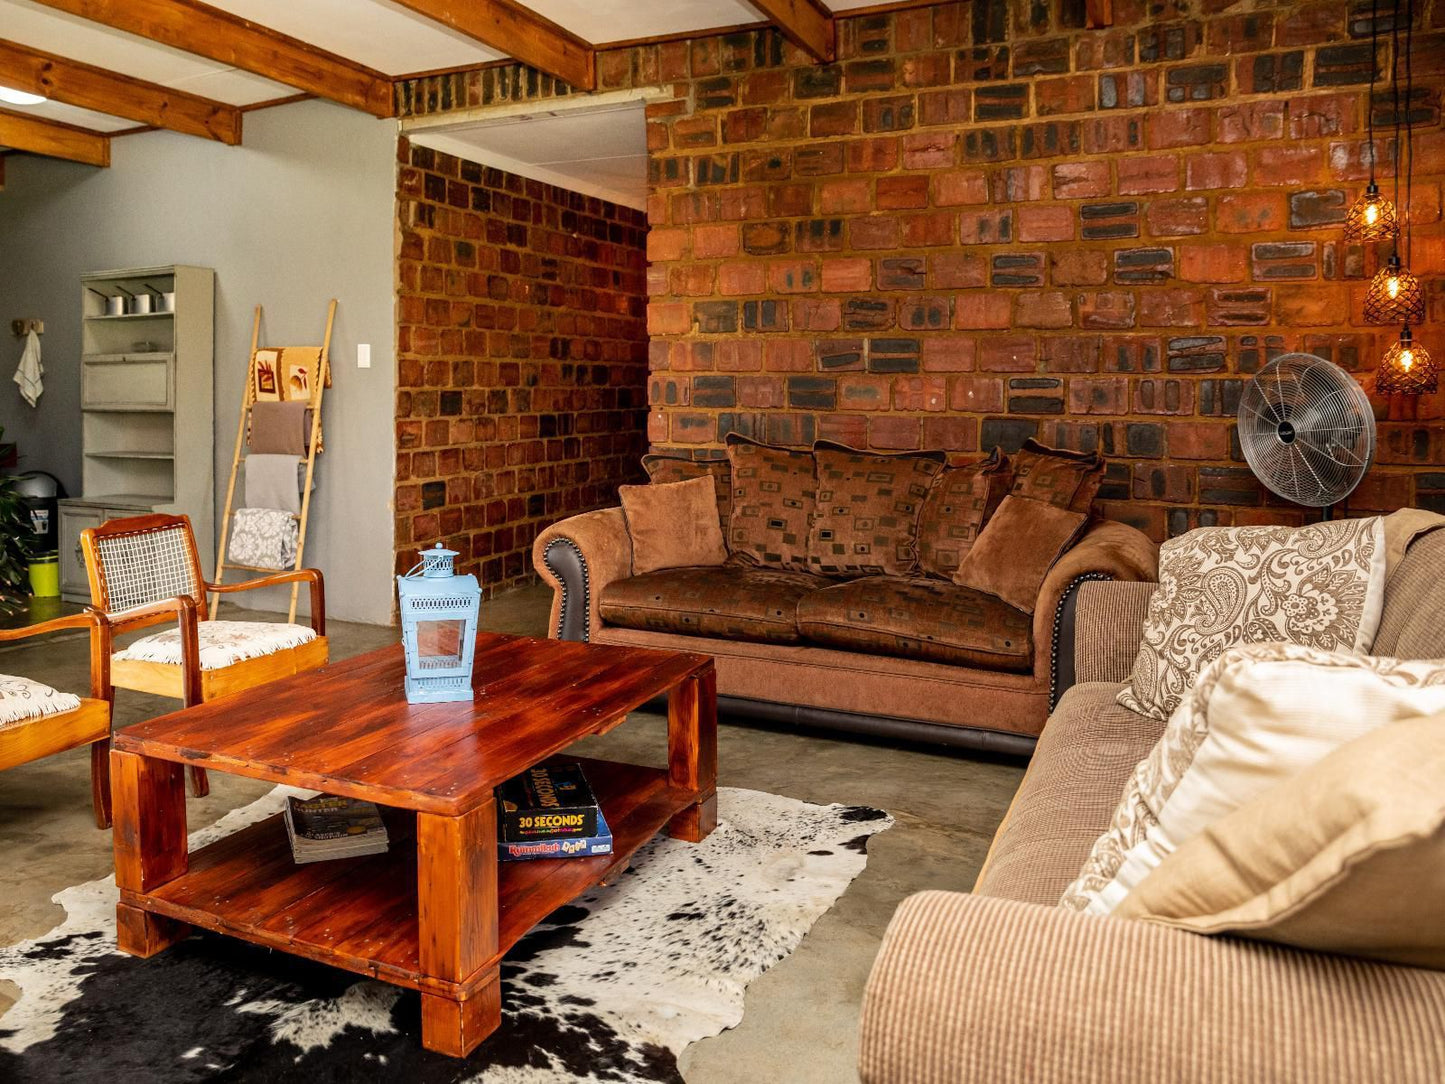 Gemaqulibe Swartruggens North West Province South Africa Brick Texture, Texture, Living Room